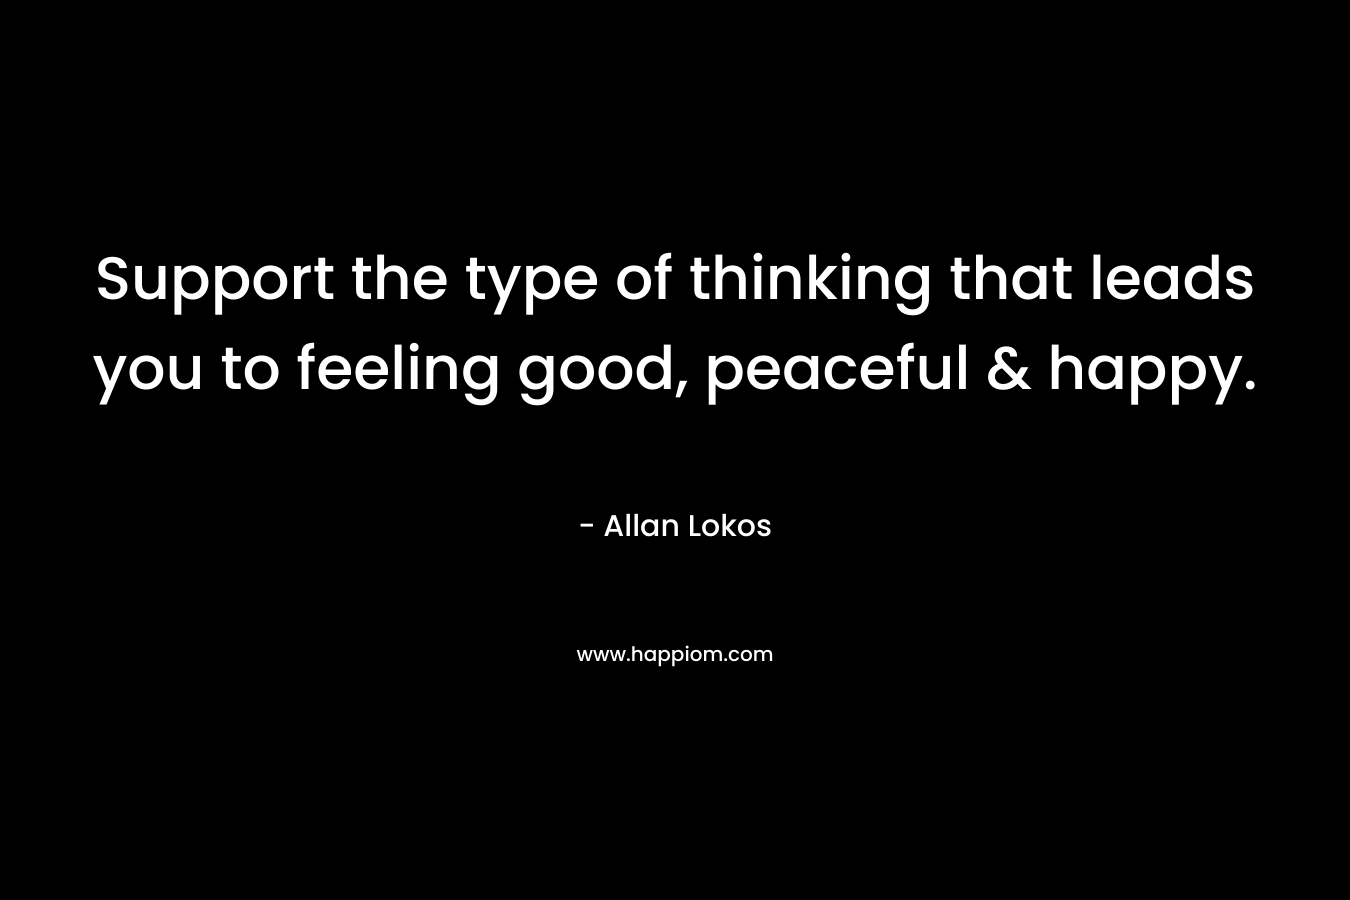 Support the type of thinking that leads you to feeling good, peaceful & happy. – Allan Lokos